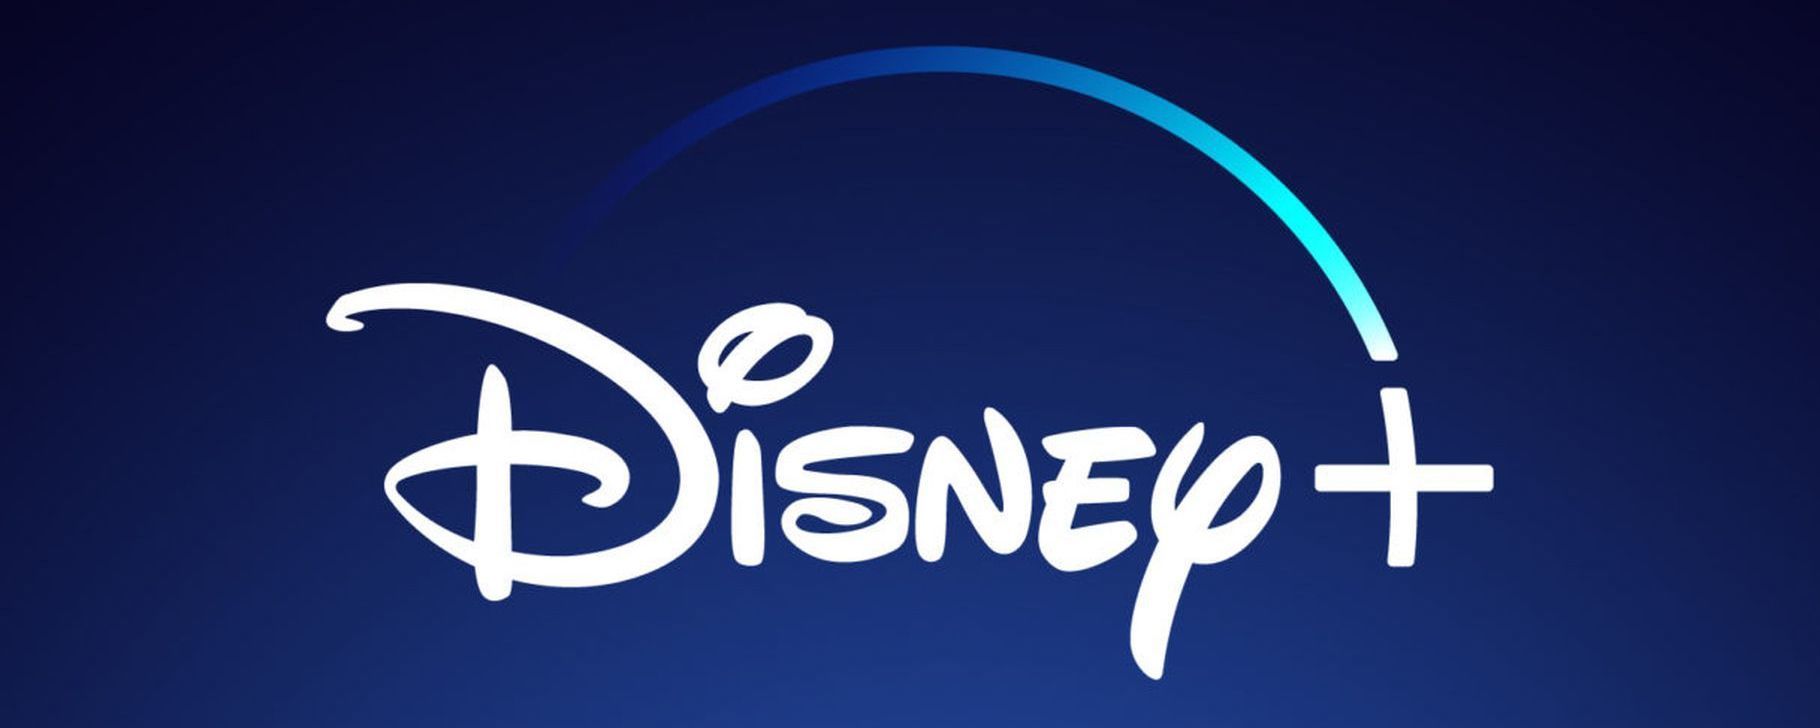 Disney+ Trial Goes Live Exclusively in The Netherlands